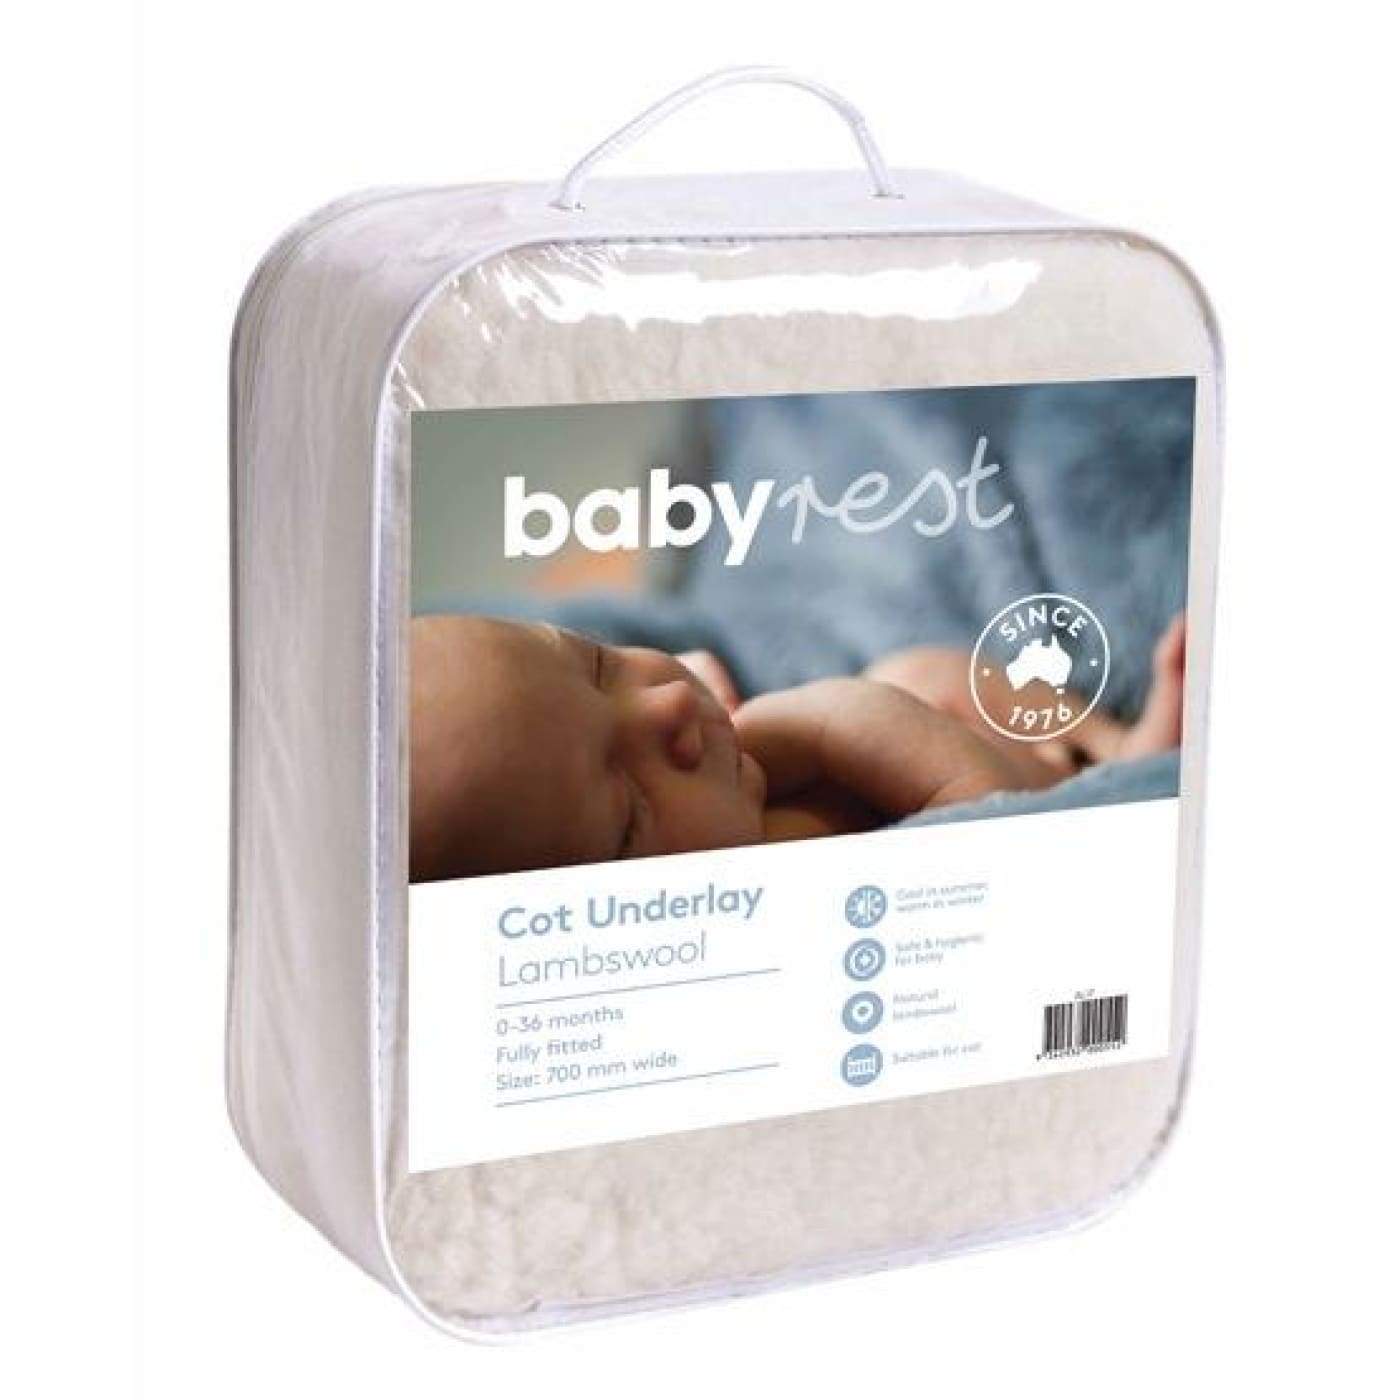 Babyrest Cot Underlay Lambswool Fully Fitted Standard Cot up to 70CM Wide - NURSERY & BEDTIME - COT MATTRESS PROTECTORS